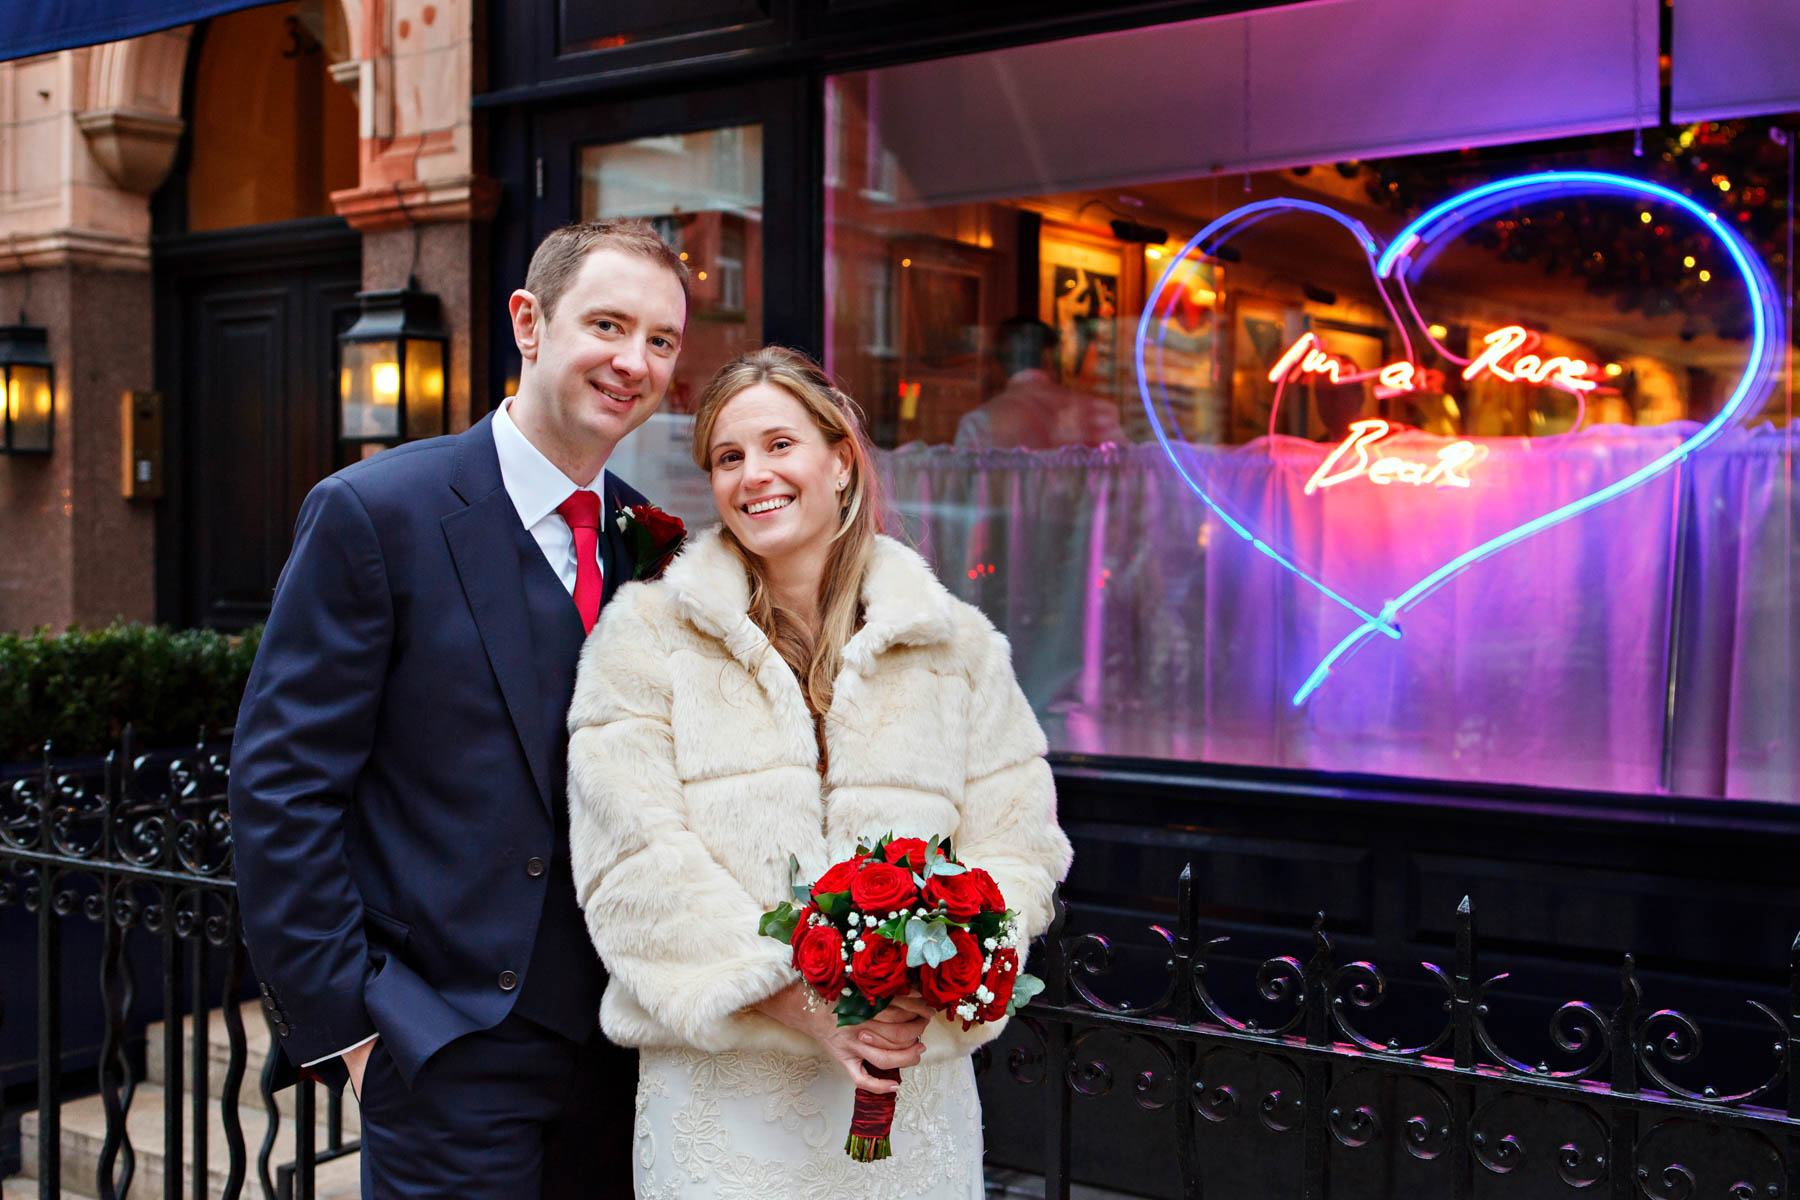 Winter wedding portrait of a bride and groom wrapped up warm, in front of a restaurant window with a big pink flourescent heart in it. The bride is wearing a white faux fur jacket and carrying a red rose bouquet.